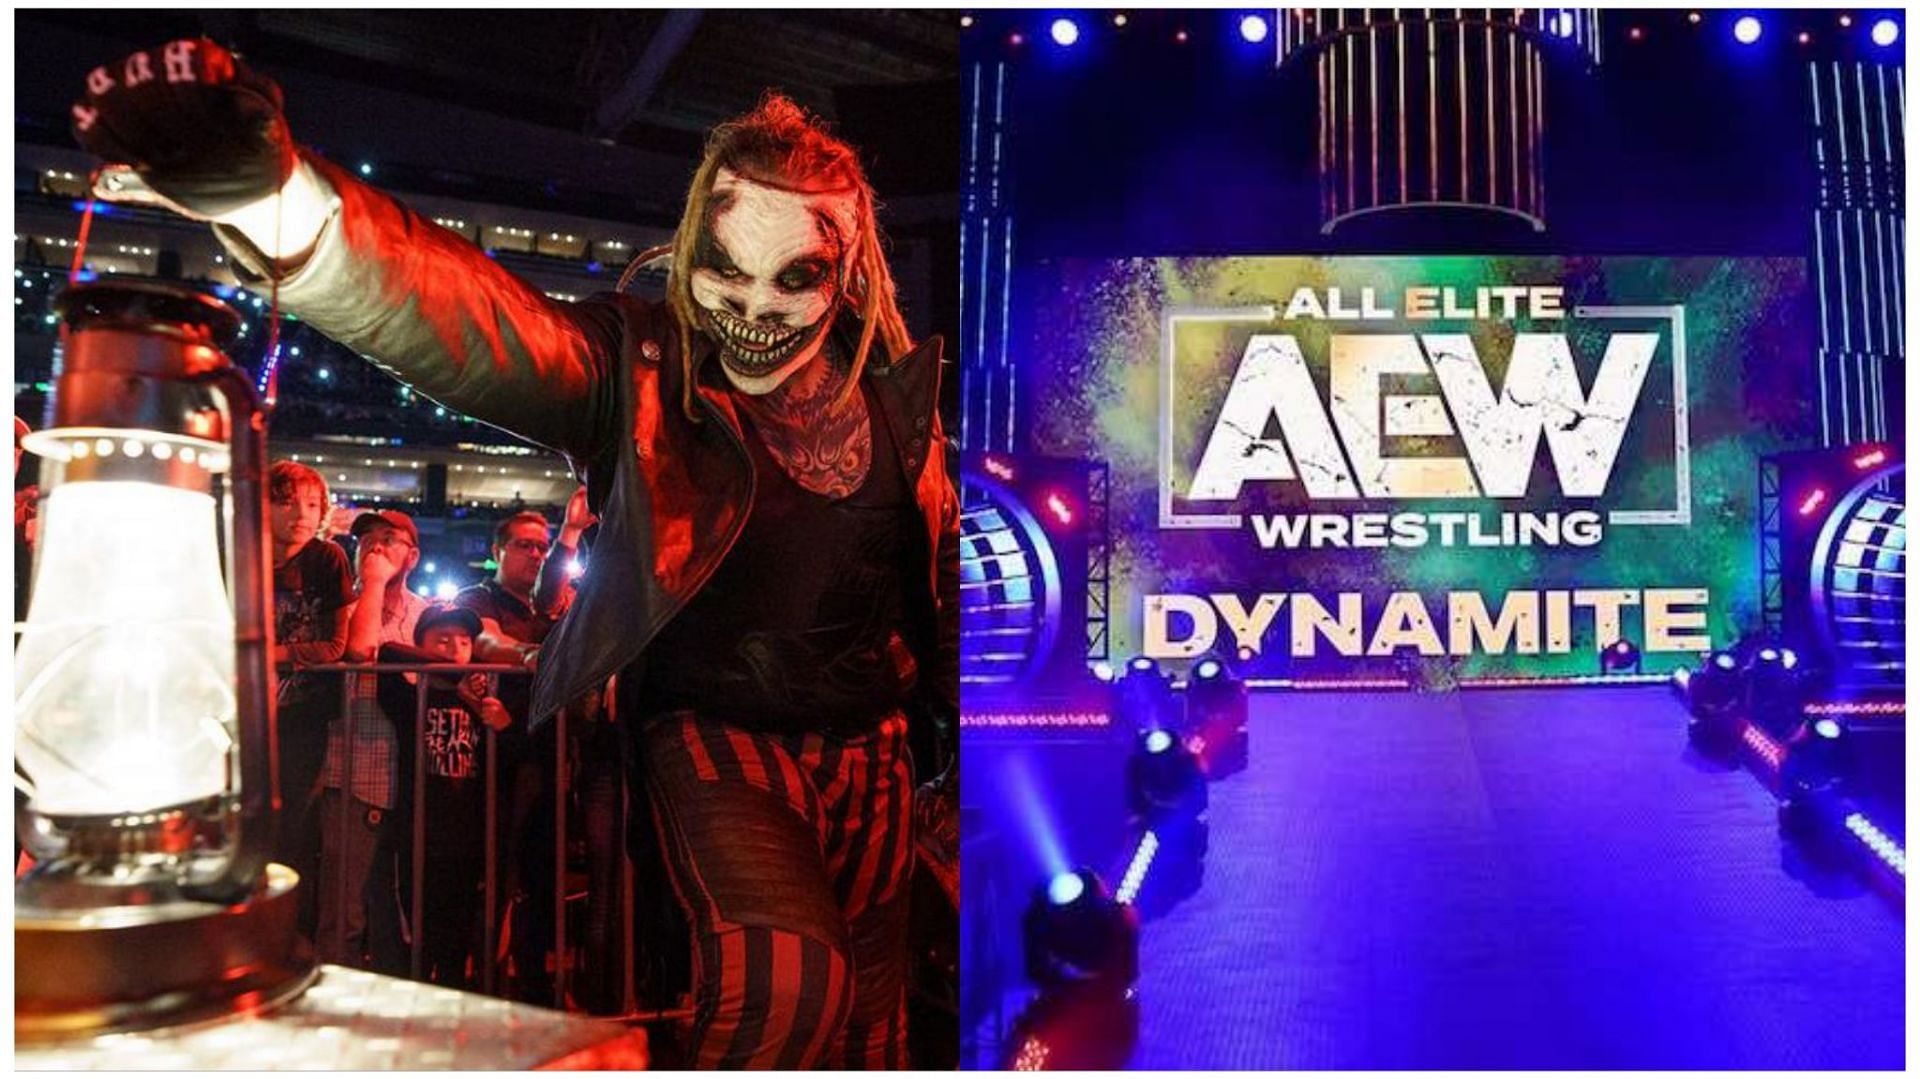 Will the former Fiend sign with AEW?